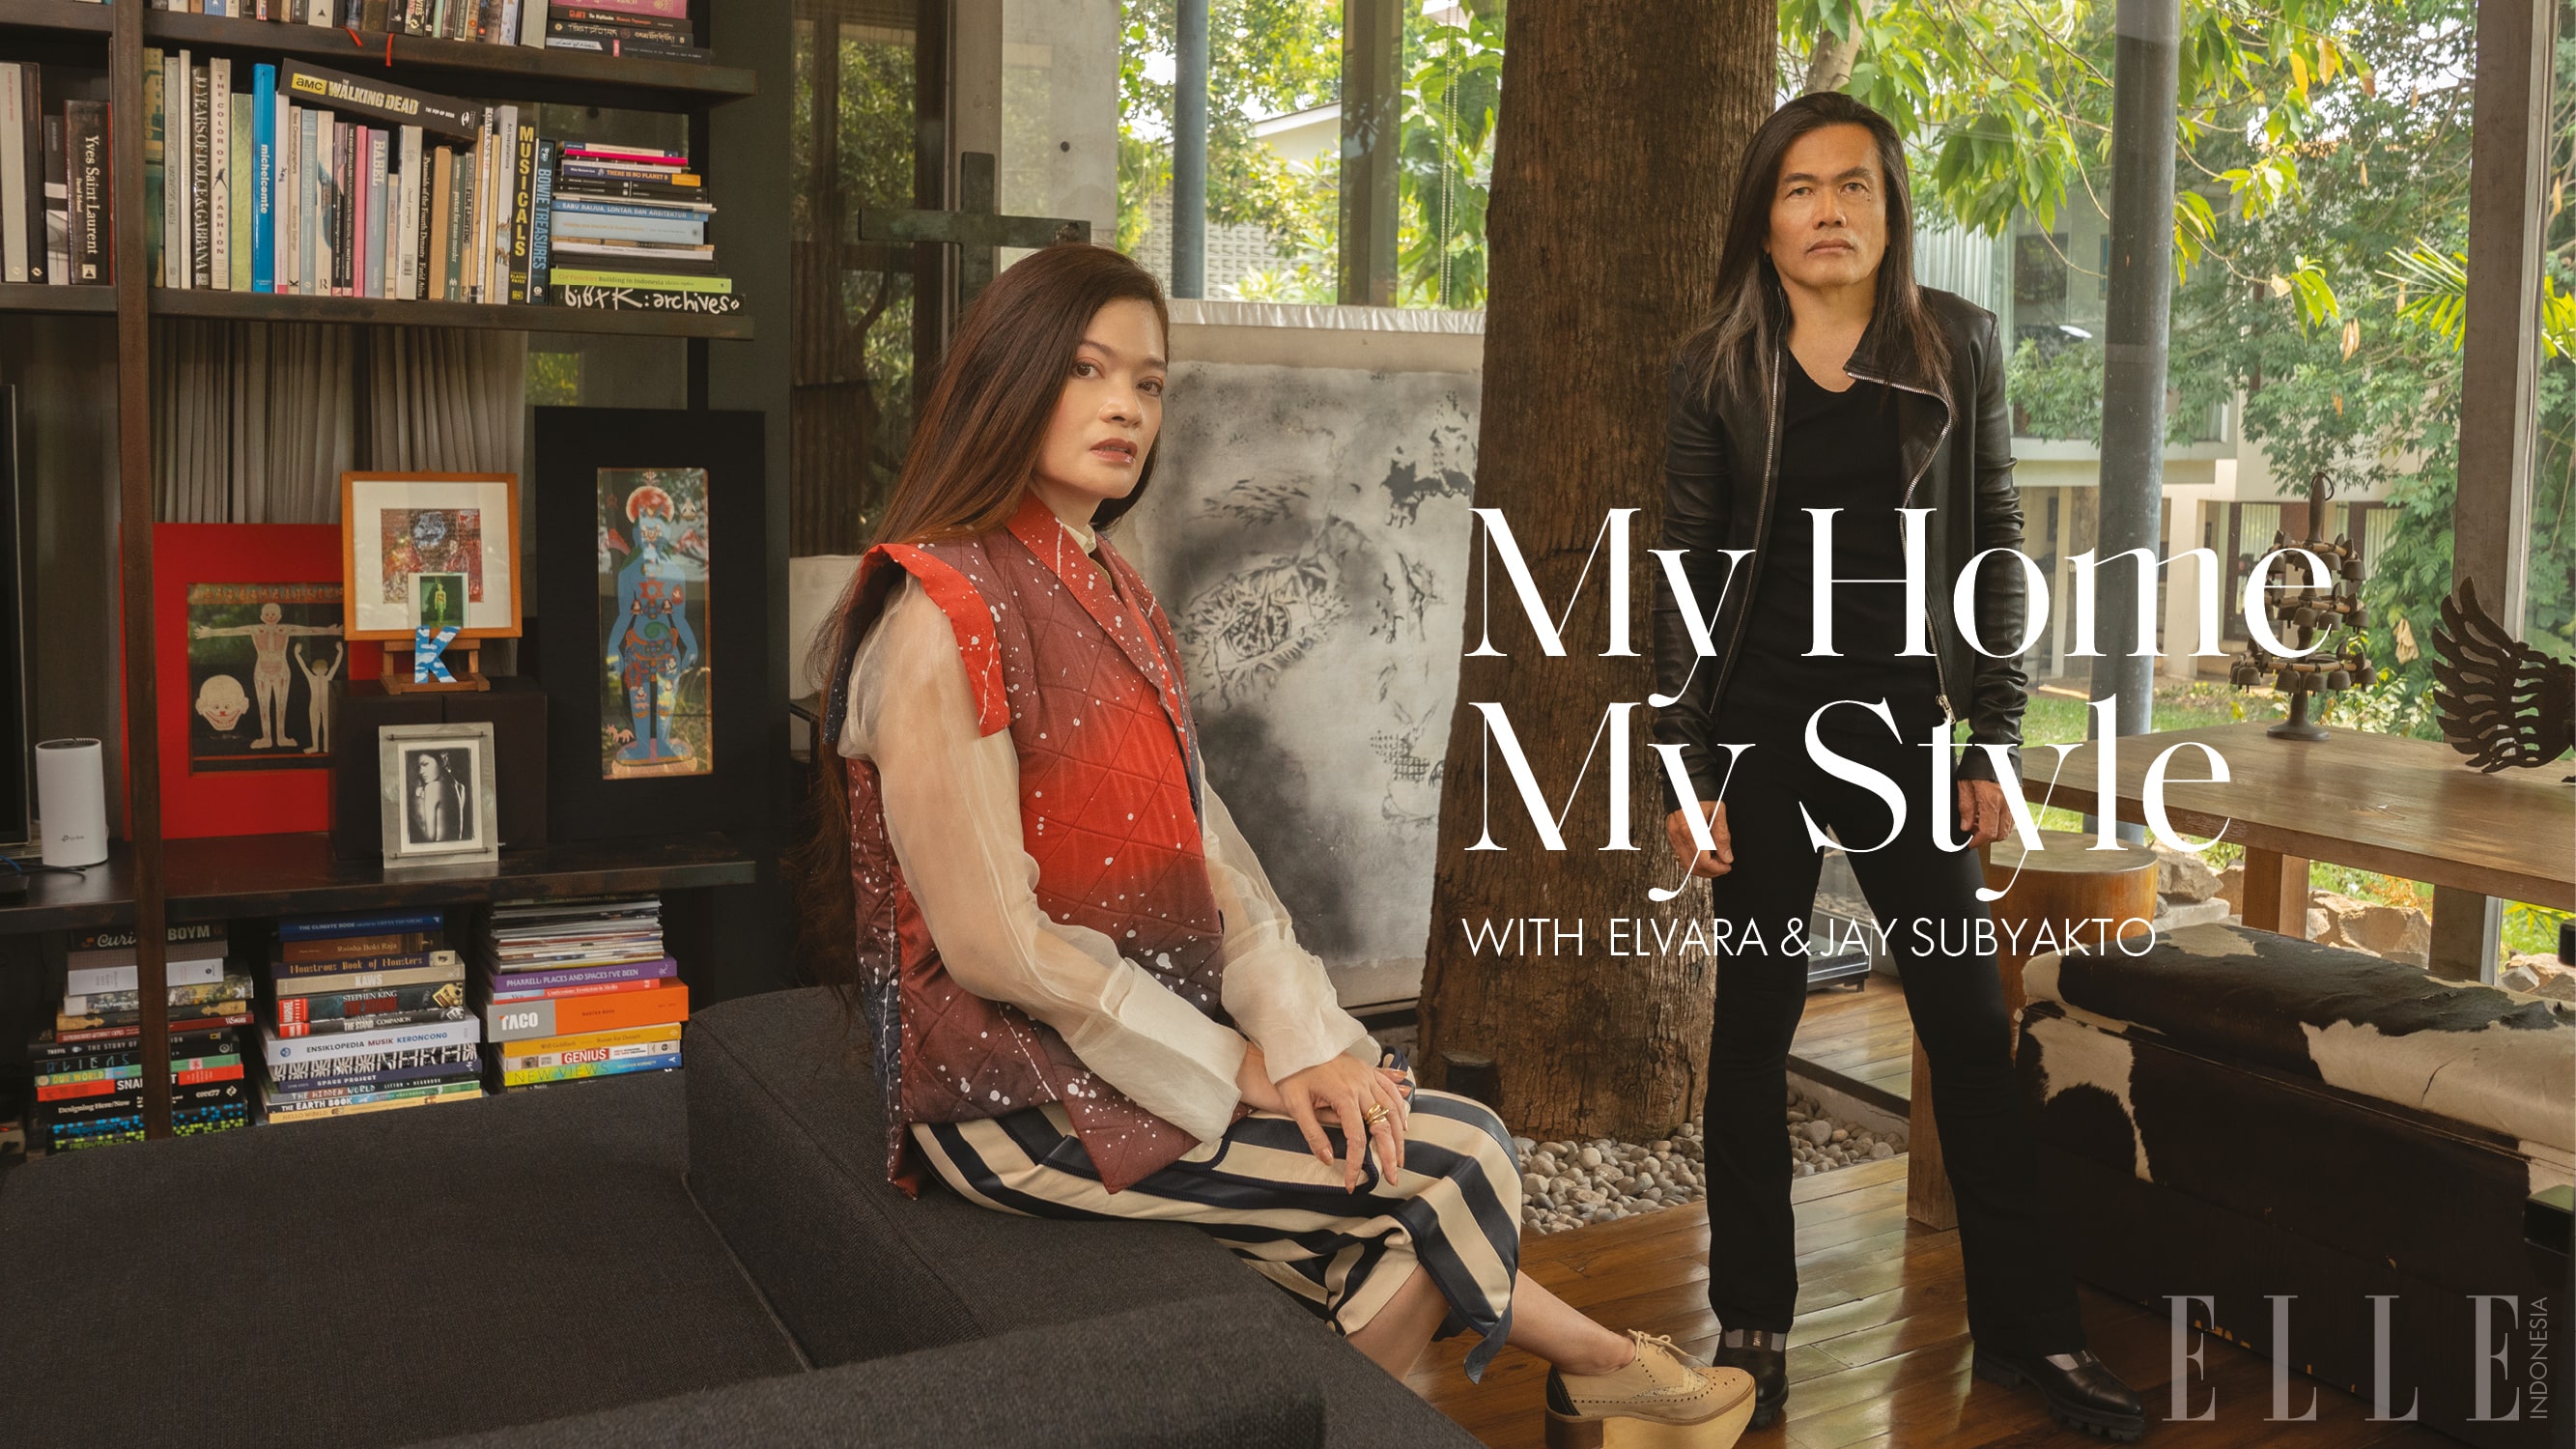 Elvara & Jay Subyakto Love Transforming Antiques into Contemporary Decorations | My Home My Style